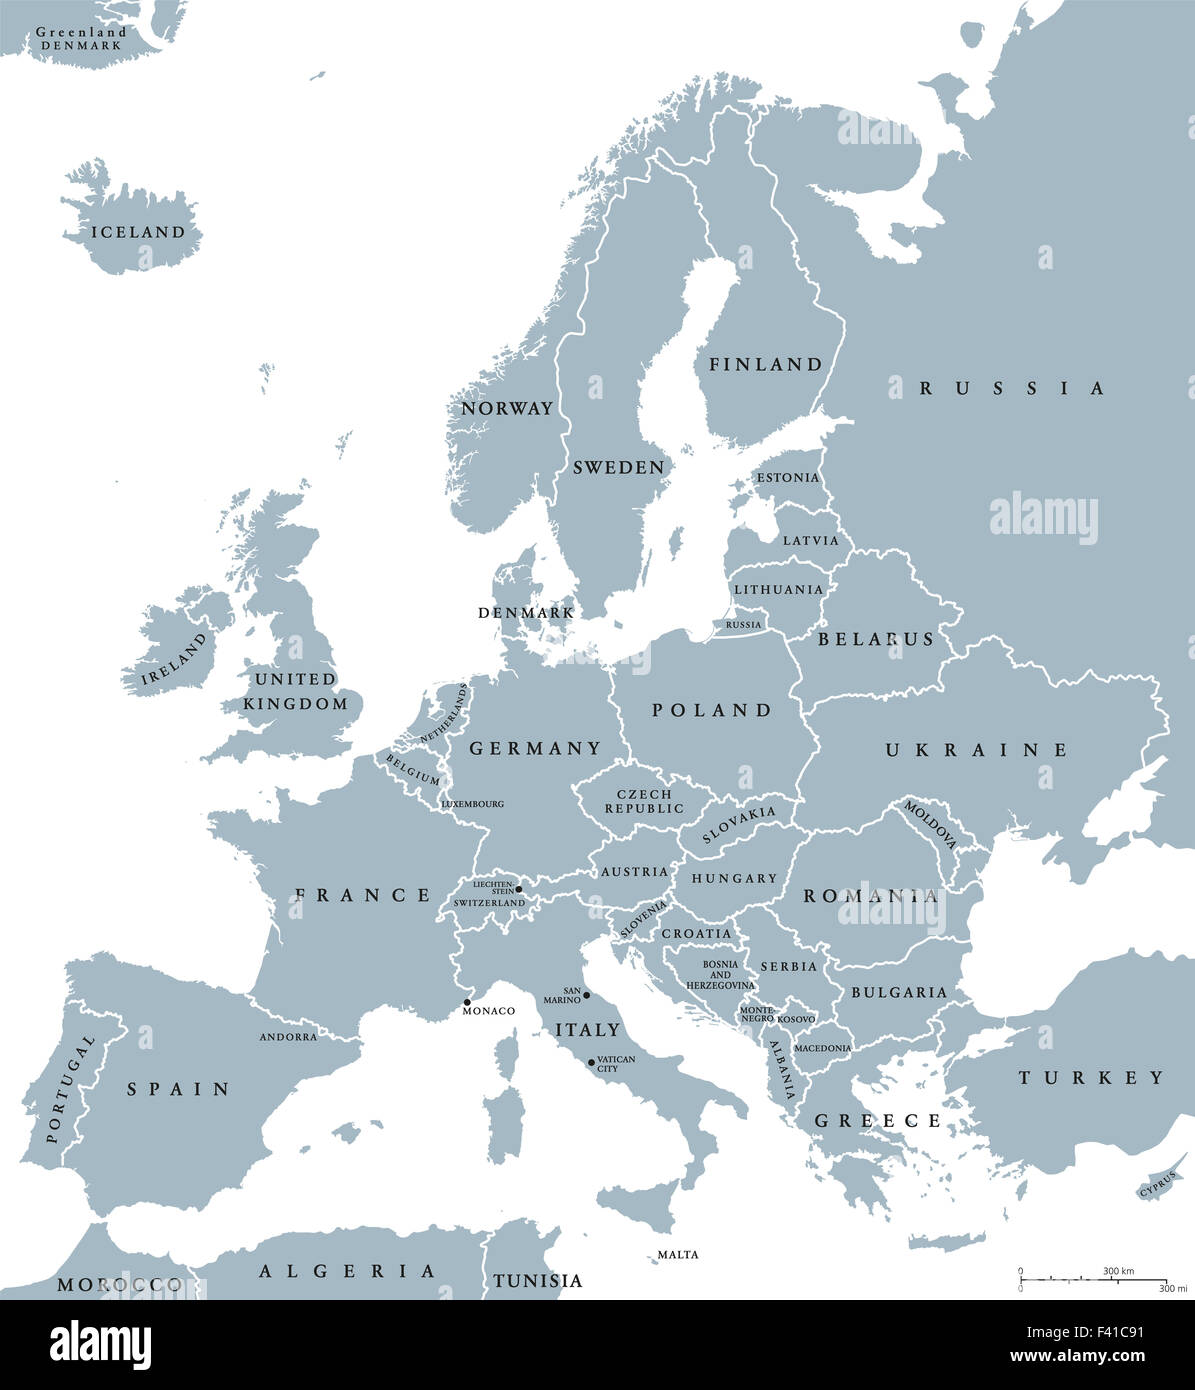 Europe countries political map with national borders and country names. English labeling and scaling. Illustration on white. Stock Photo